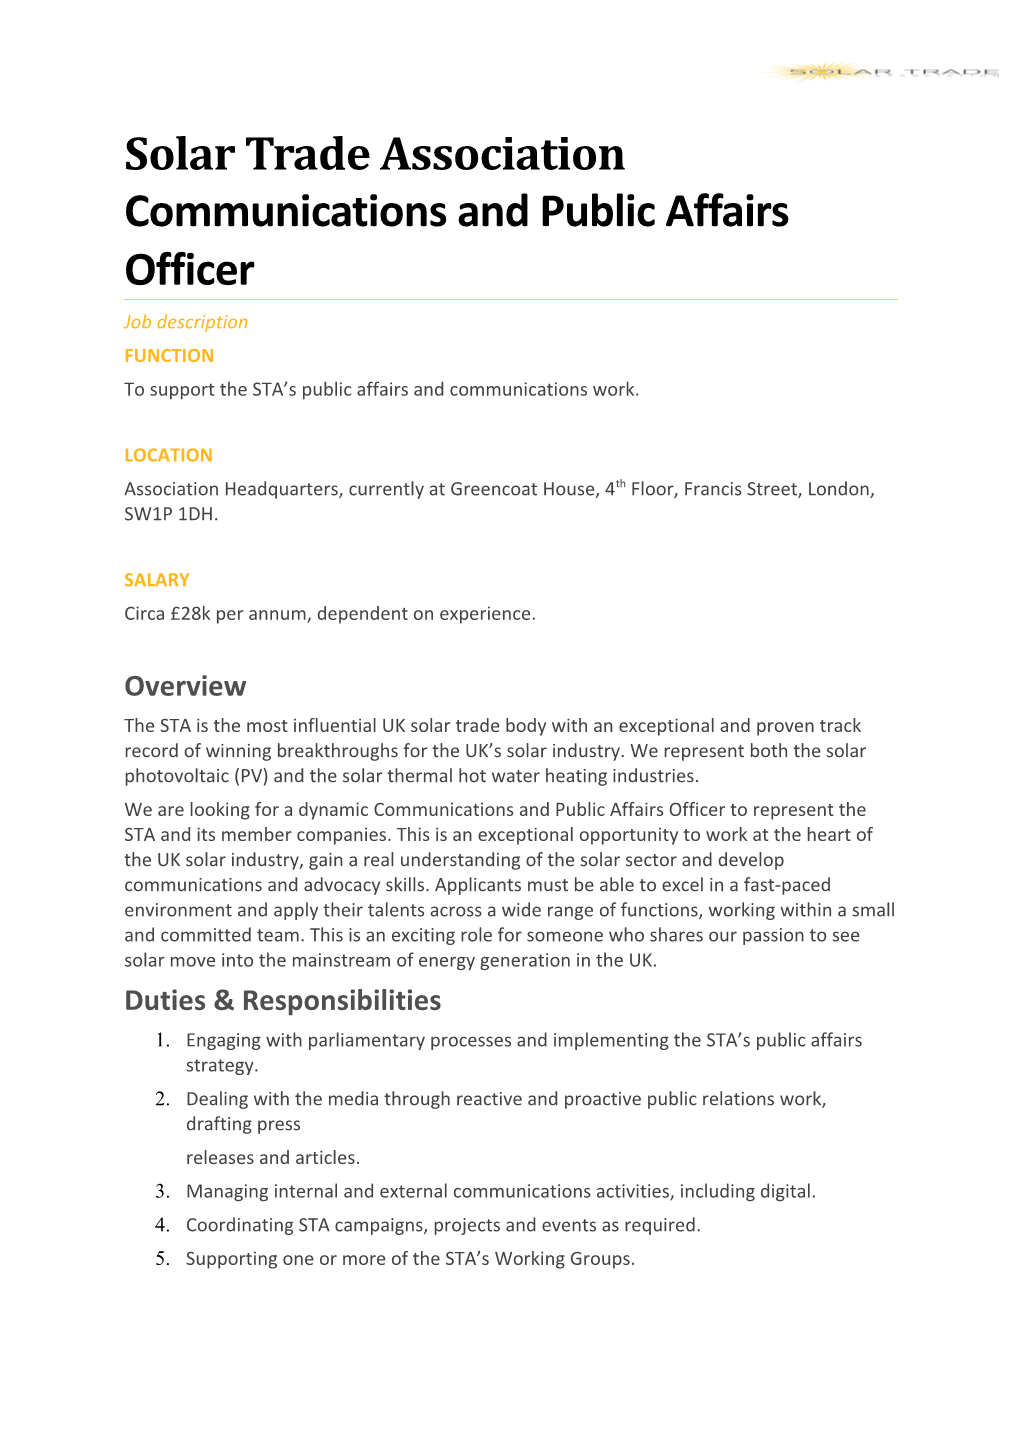 Communications and Public Affairs Officer